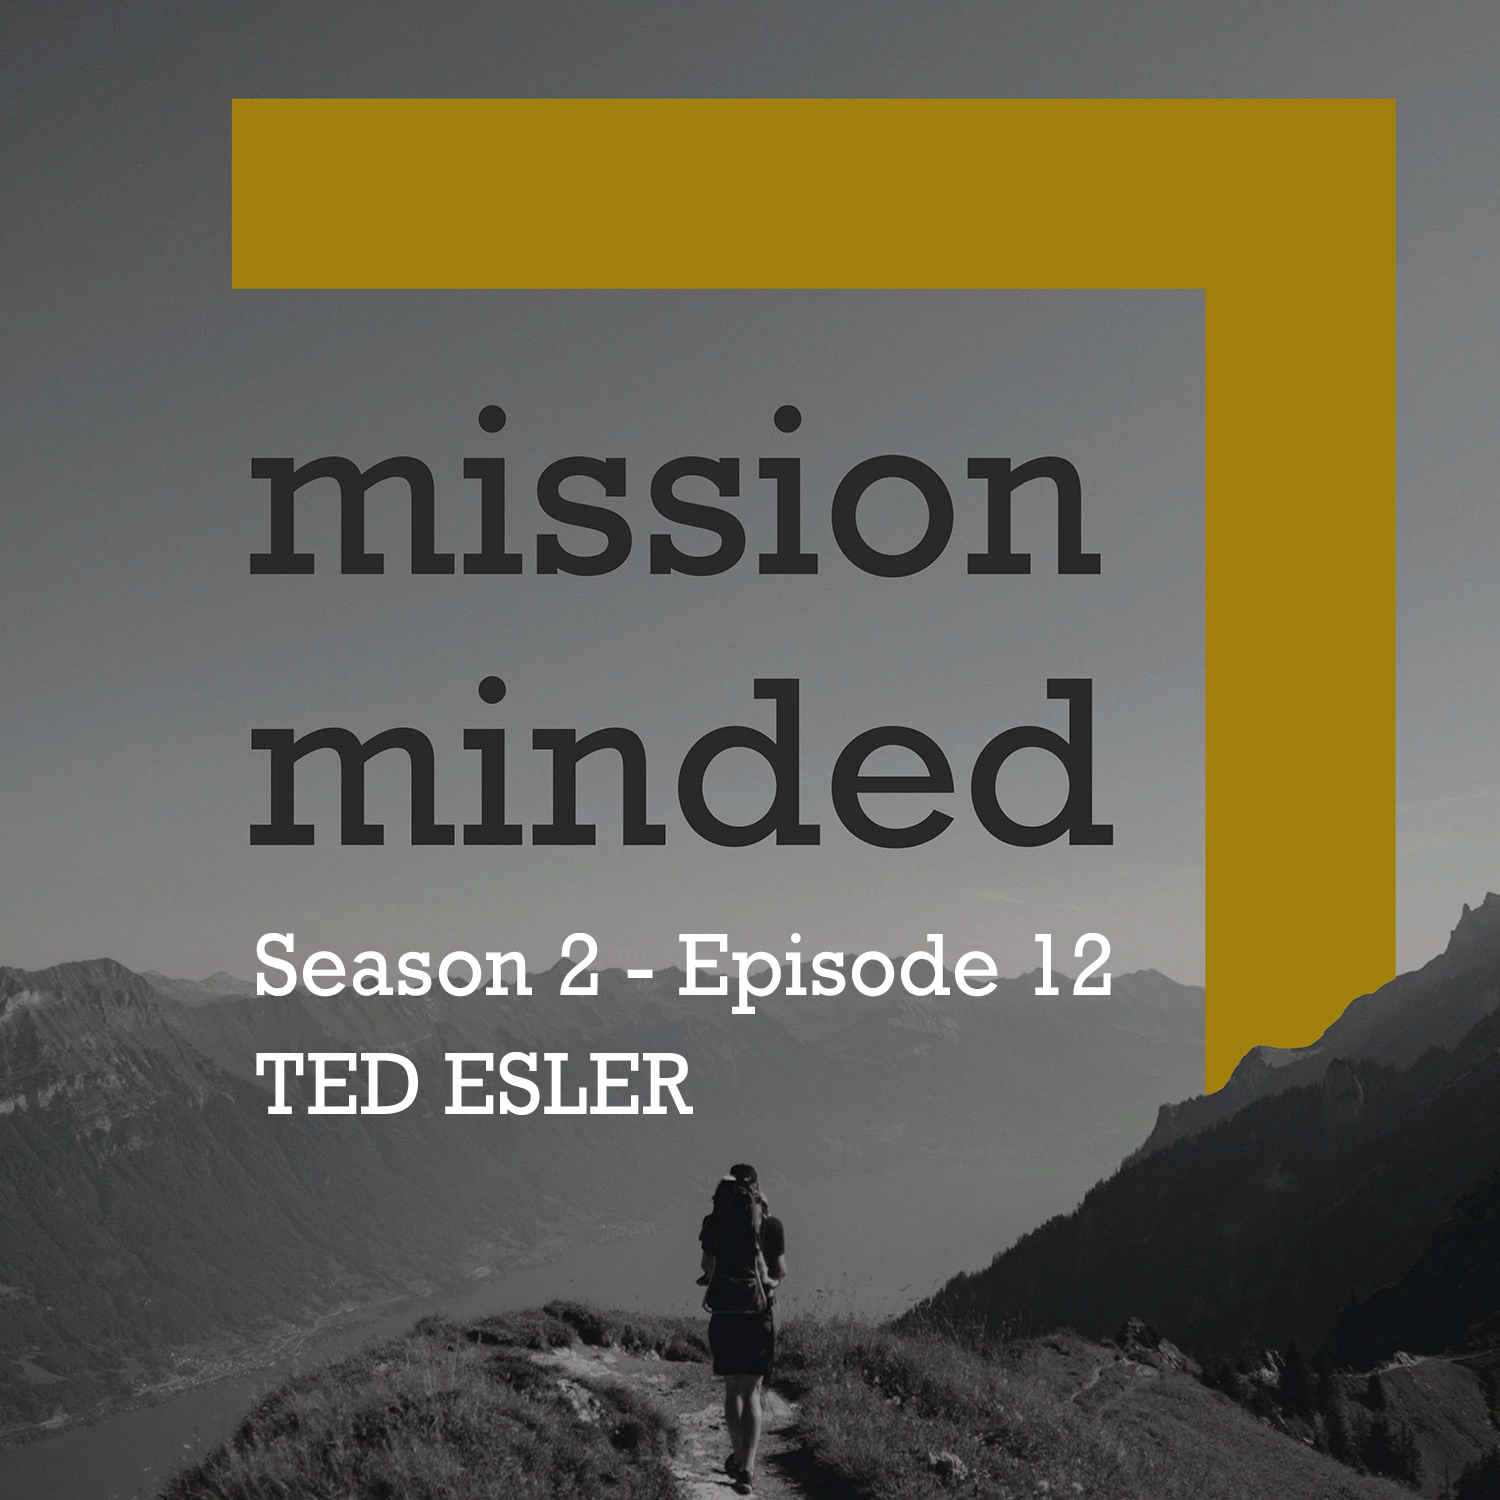 Church Planting in Bosnia, Missio Nexus, and Spiritual Retreat with Ted Esler